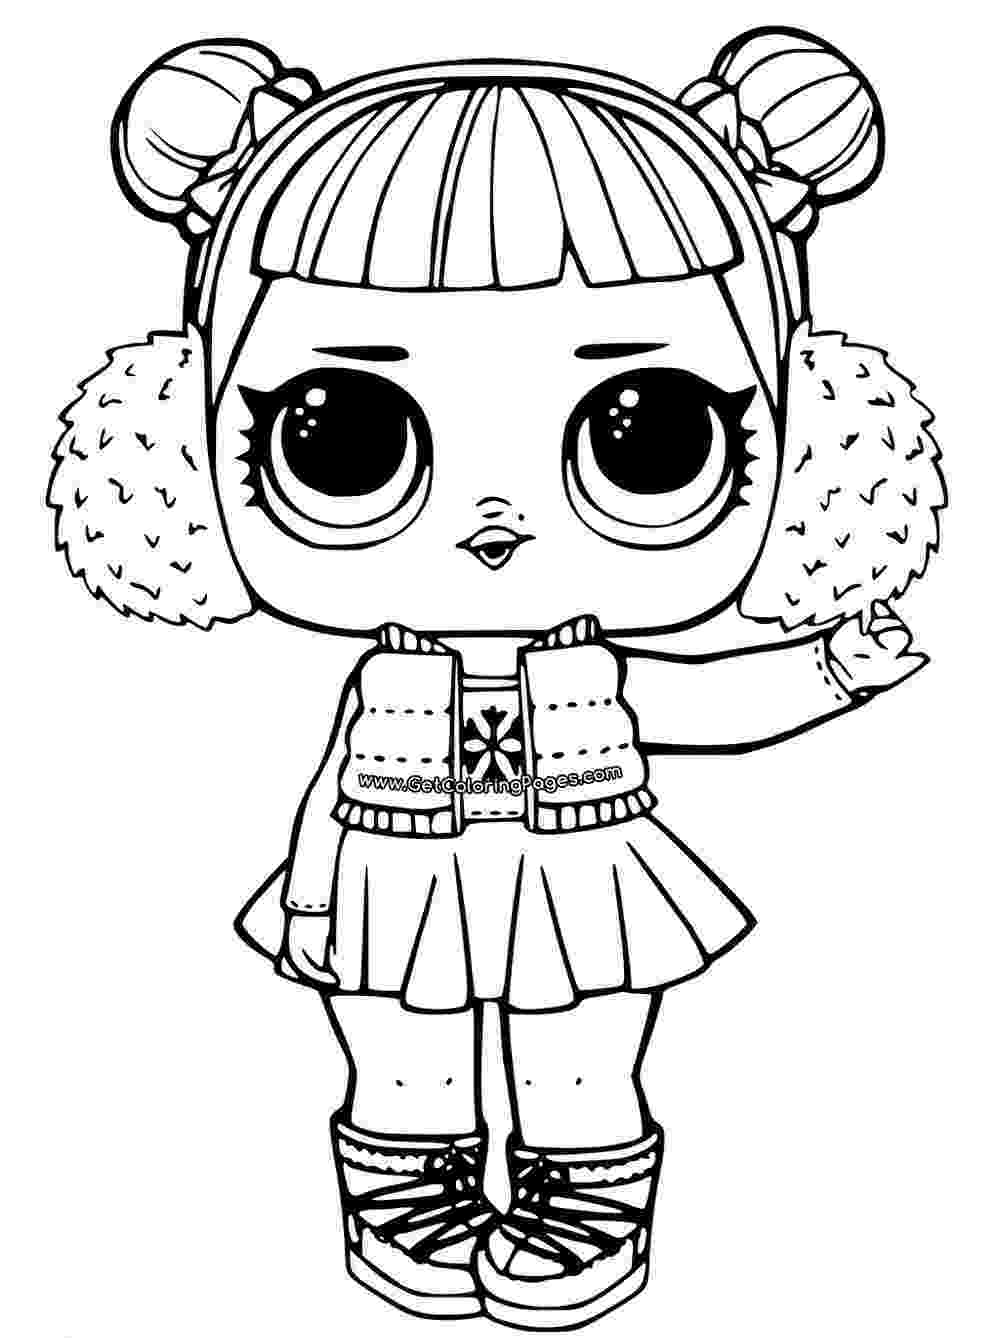 dolls coloring pages doll coloring pages best coloring pages for kids dolls coloring pages 